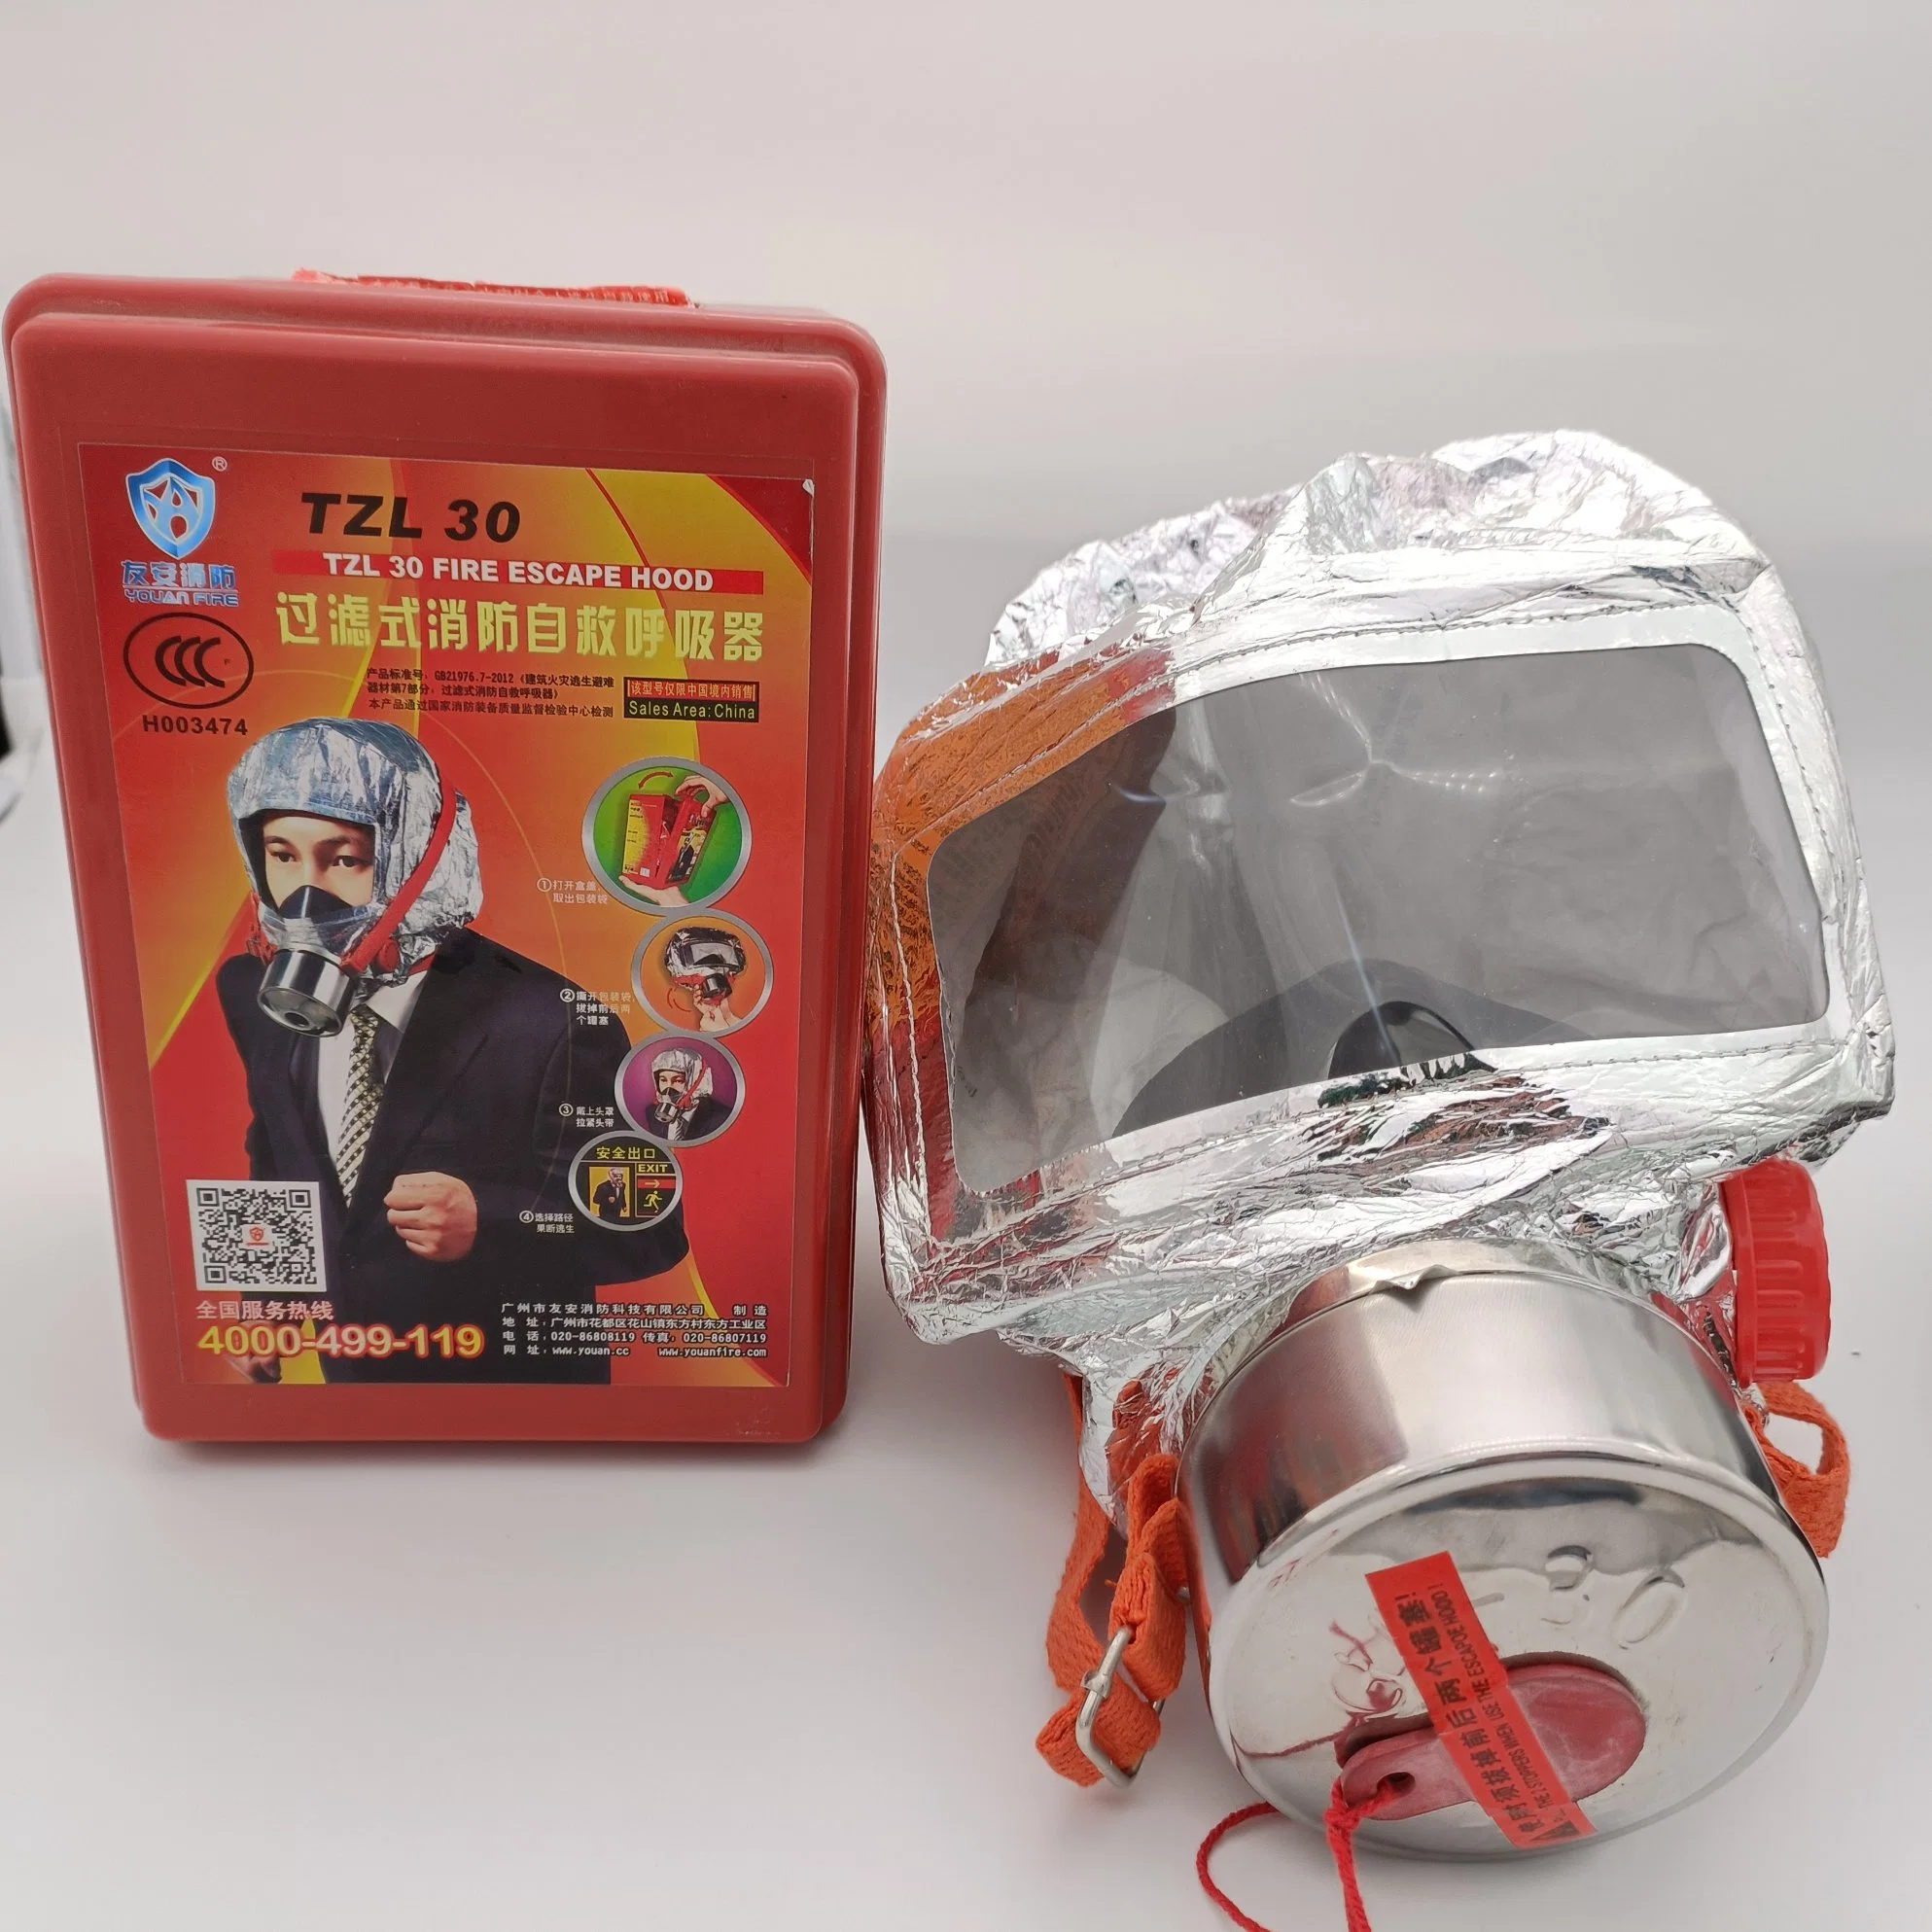 Emergency Safety Chemical Fire Full Face Escape Mask (قناع الهروب